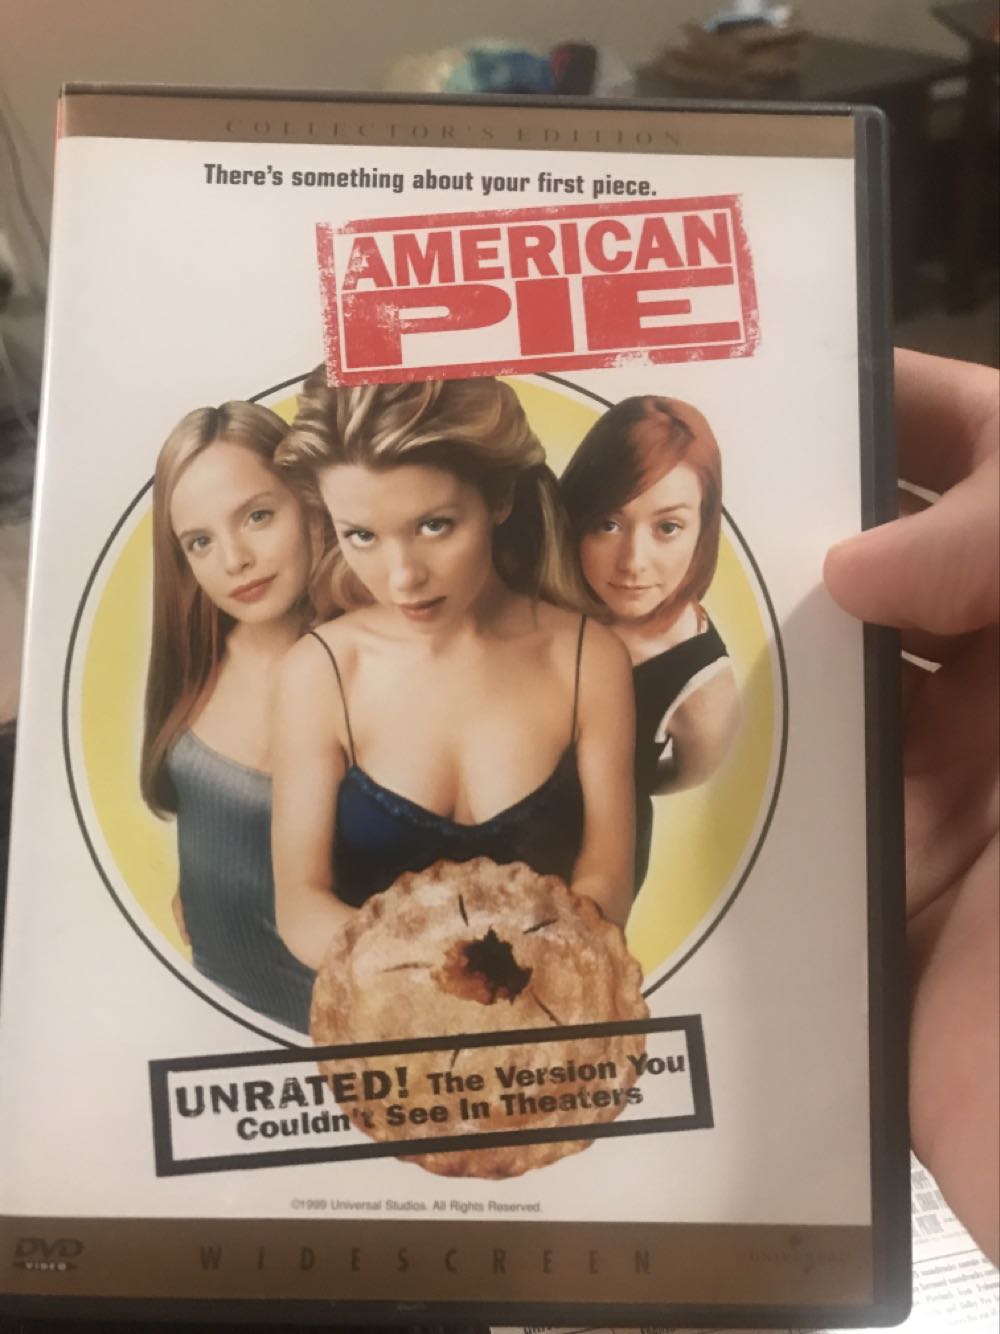 American Pie (33) DVD movie collectible [Barcode 025192073526] - Main Image 3